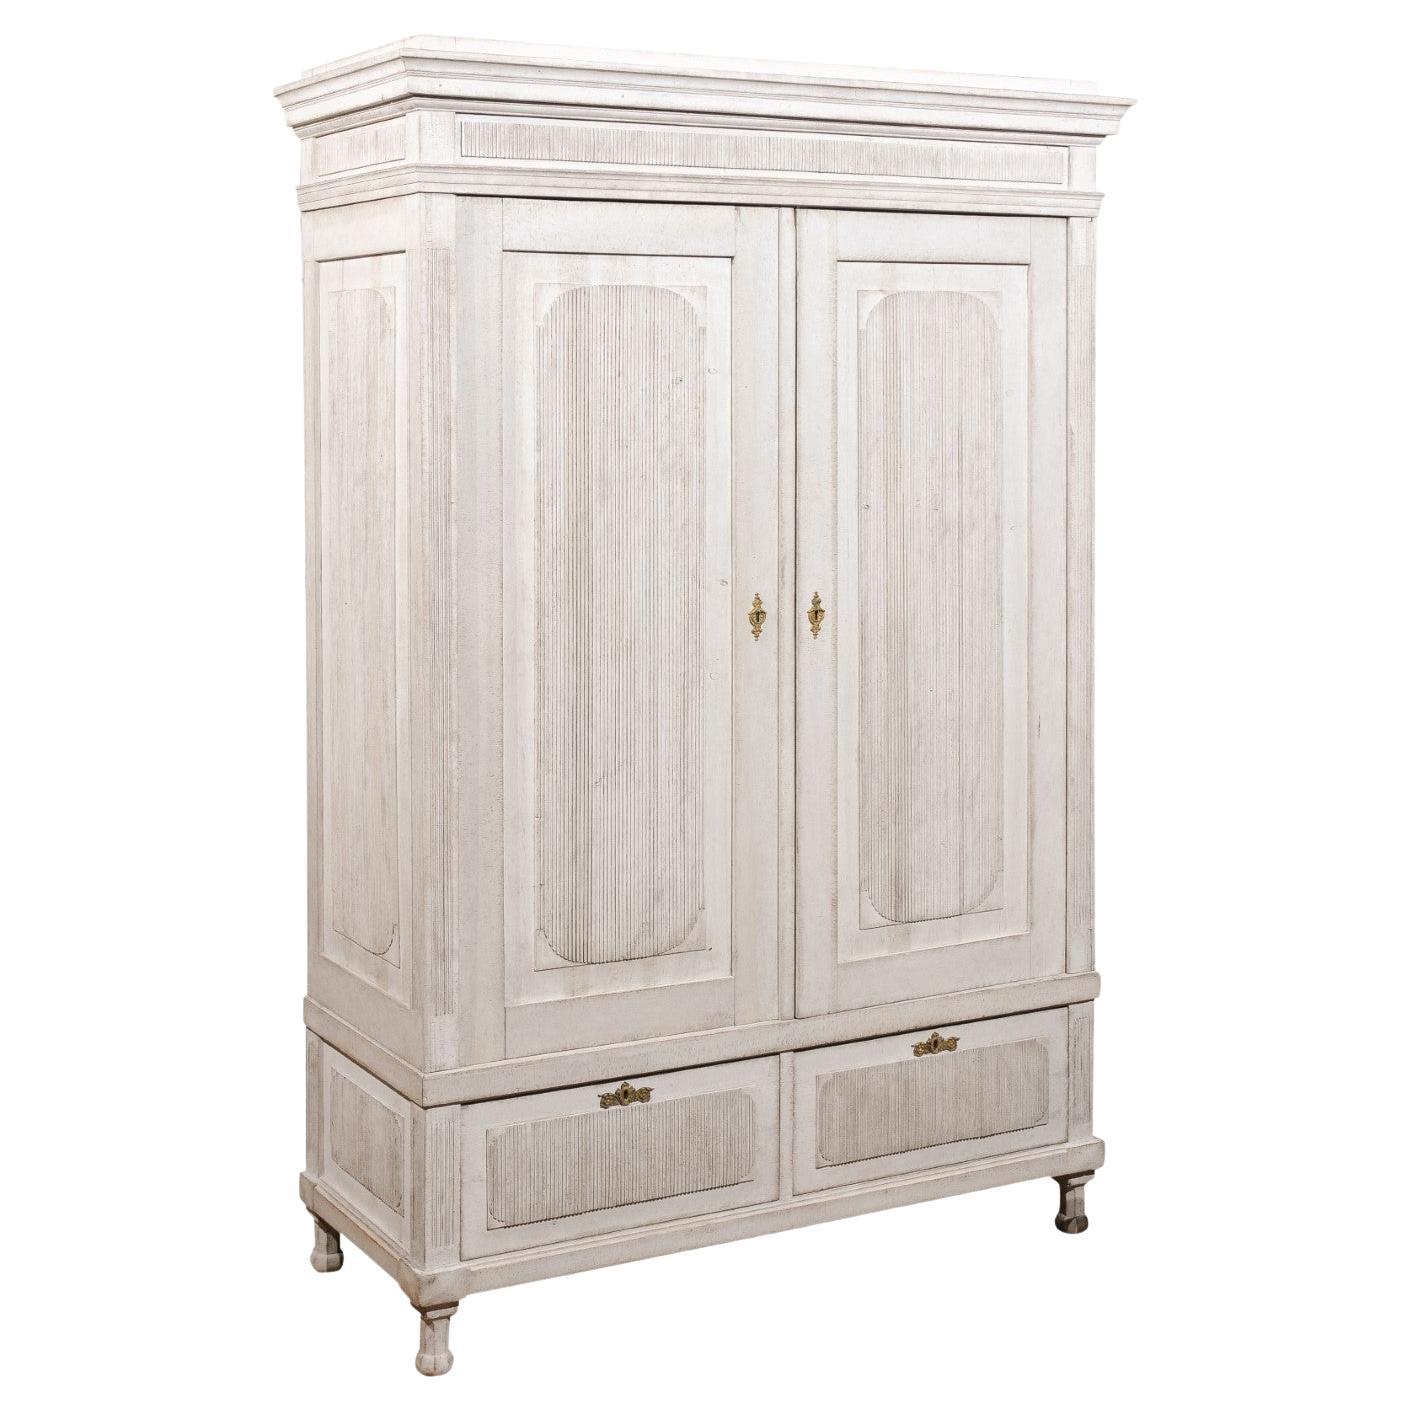 Scandinavian Painted Wood Wardrobe with Doors, Drawers and Carved Reeded Motifs